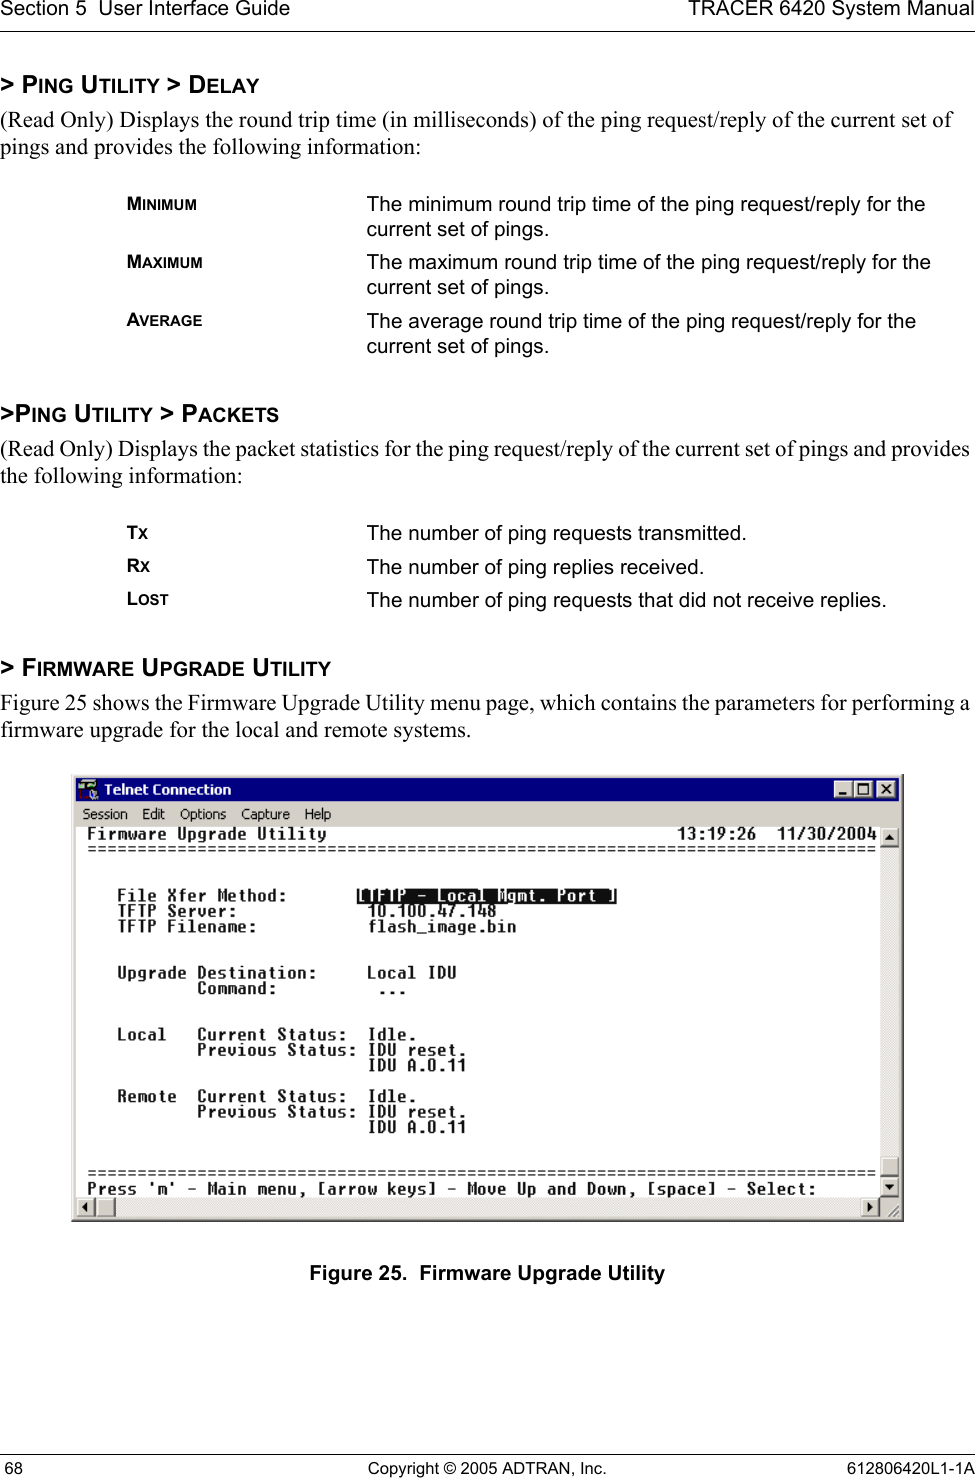 Section 5  User Interface Guide TRACER 6420 System Manual 68 Copyright © 2005 ADTRAN, Inc. 612806420L1-1A&gt; PING UTILITY &gt; DELAY(Read Only) Displays the round trip time (in milliseconds) of the ping request/reply of the current set of pings and provides the following information:&gt;PING UTILITY &gt; PACKETS(Read Only) Displays the packet statistics for the ping request/reply of the current set of pings and provides the following information:&gt; FIRMWARE UPGRADE UTILITYFigure 25 shows the Firmware Upgrade Utility menu page, which contains the parameters for performing a firmware upgrade for the local and remote systems. Figure 25.  Firmware Upgrade UtilityMINIMUM The minimum round trip time of the ping request/reply for the current set of pings.MAXIMUM The maximum round trip time of the ping request/reply for the current set of pings.AVERAGE The average round trip time of the ping request/reply for the current set of pings.TXThe number of ping requests transmitted.RXThe number of ping replies received.LOST The number of ping requests that did not receive replies. 